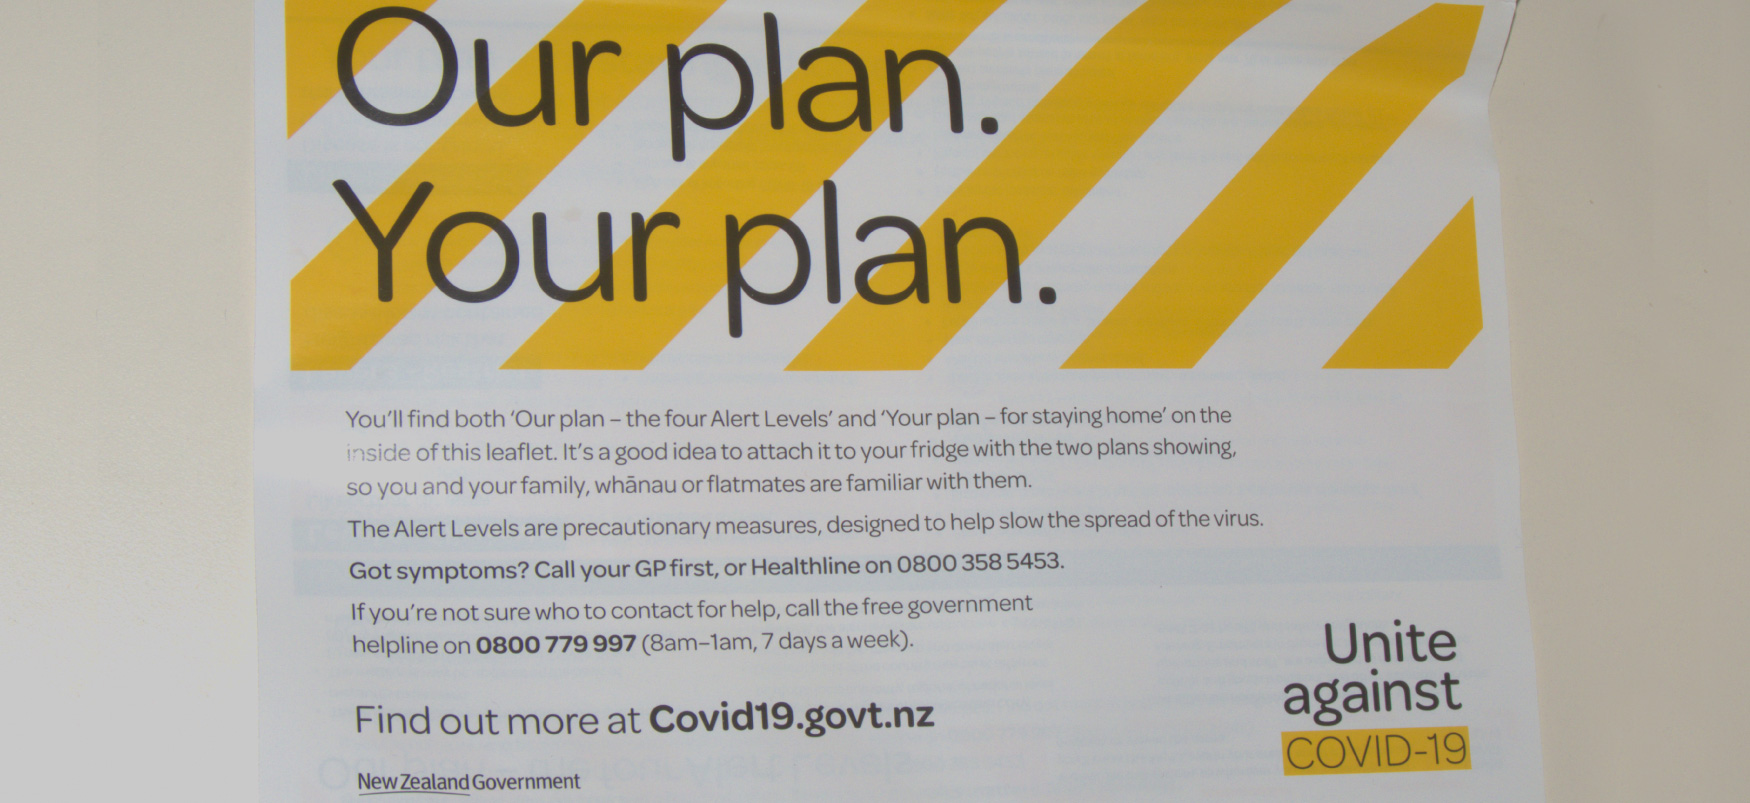 A poster hung on a wall reads “Our plan. Your plan.” against a backdrop of yellow diagonal stripes. The poster conveys information on alert levels and guidance on social distancing during the COVID-19 pandemic. It indicates that more information is available at Covid19.govt.nz.